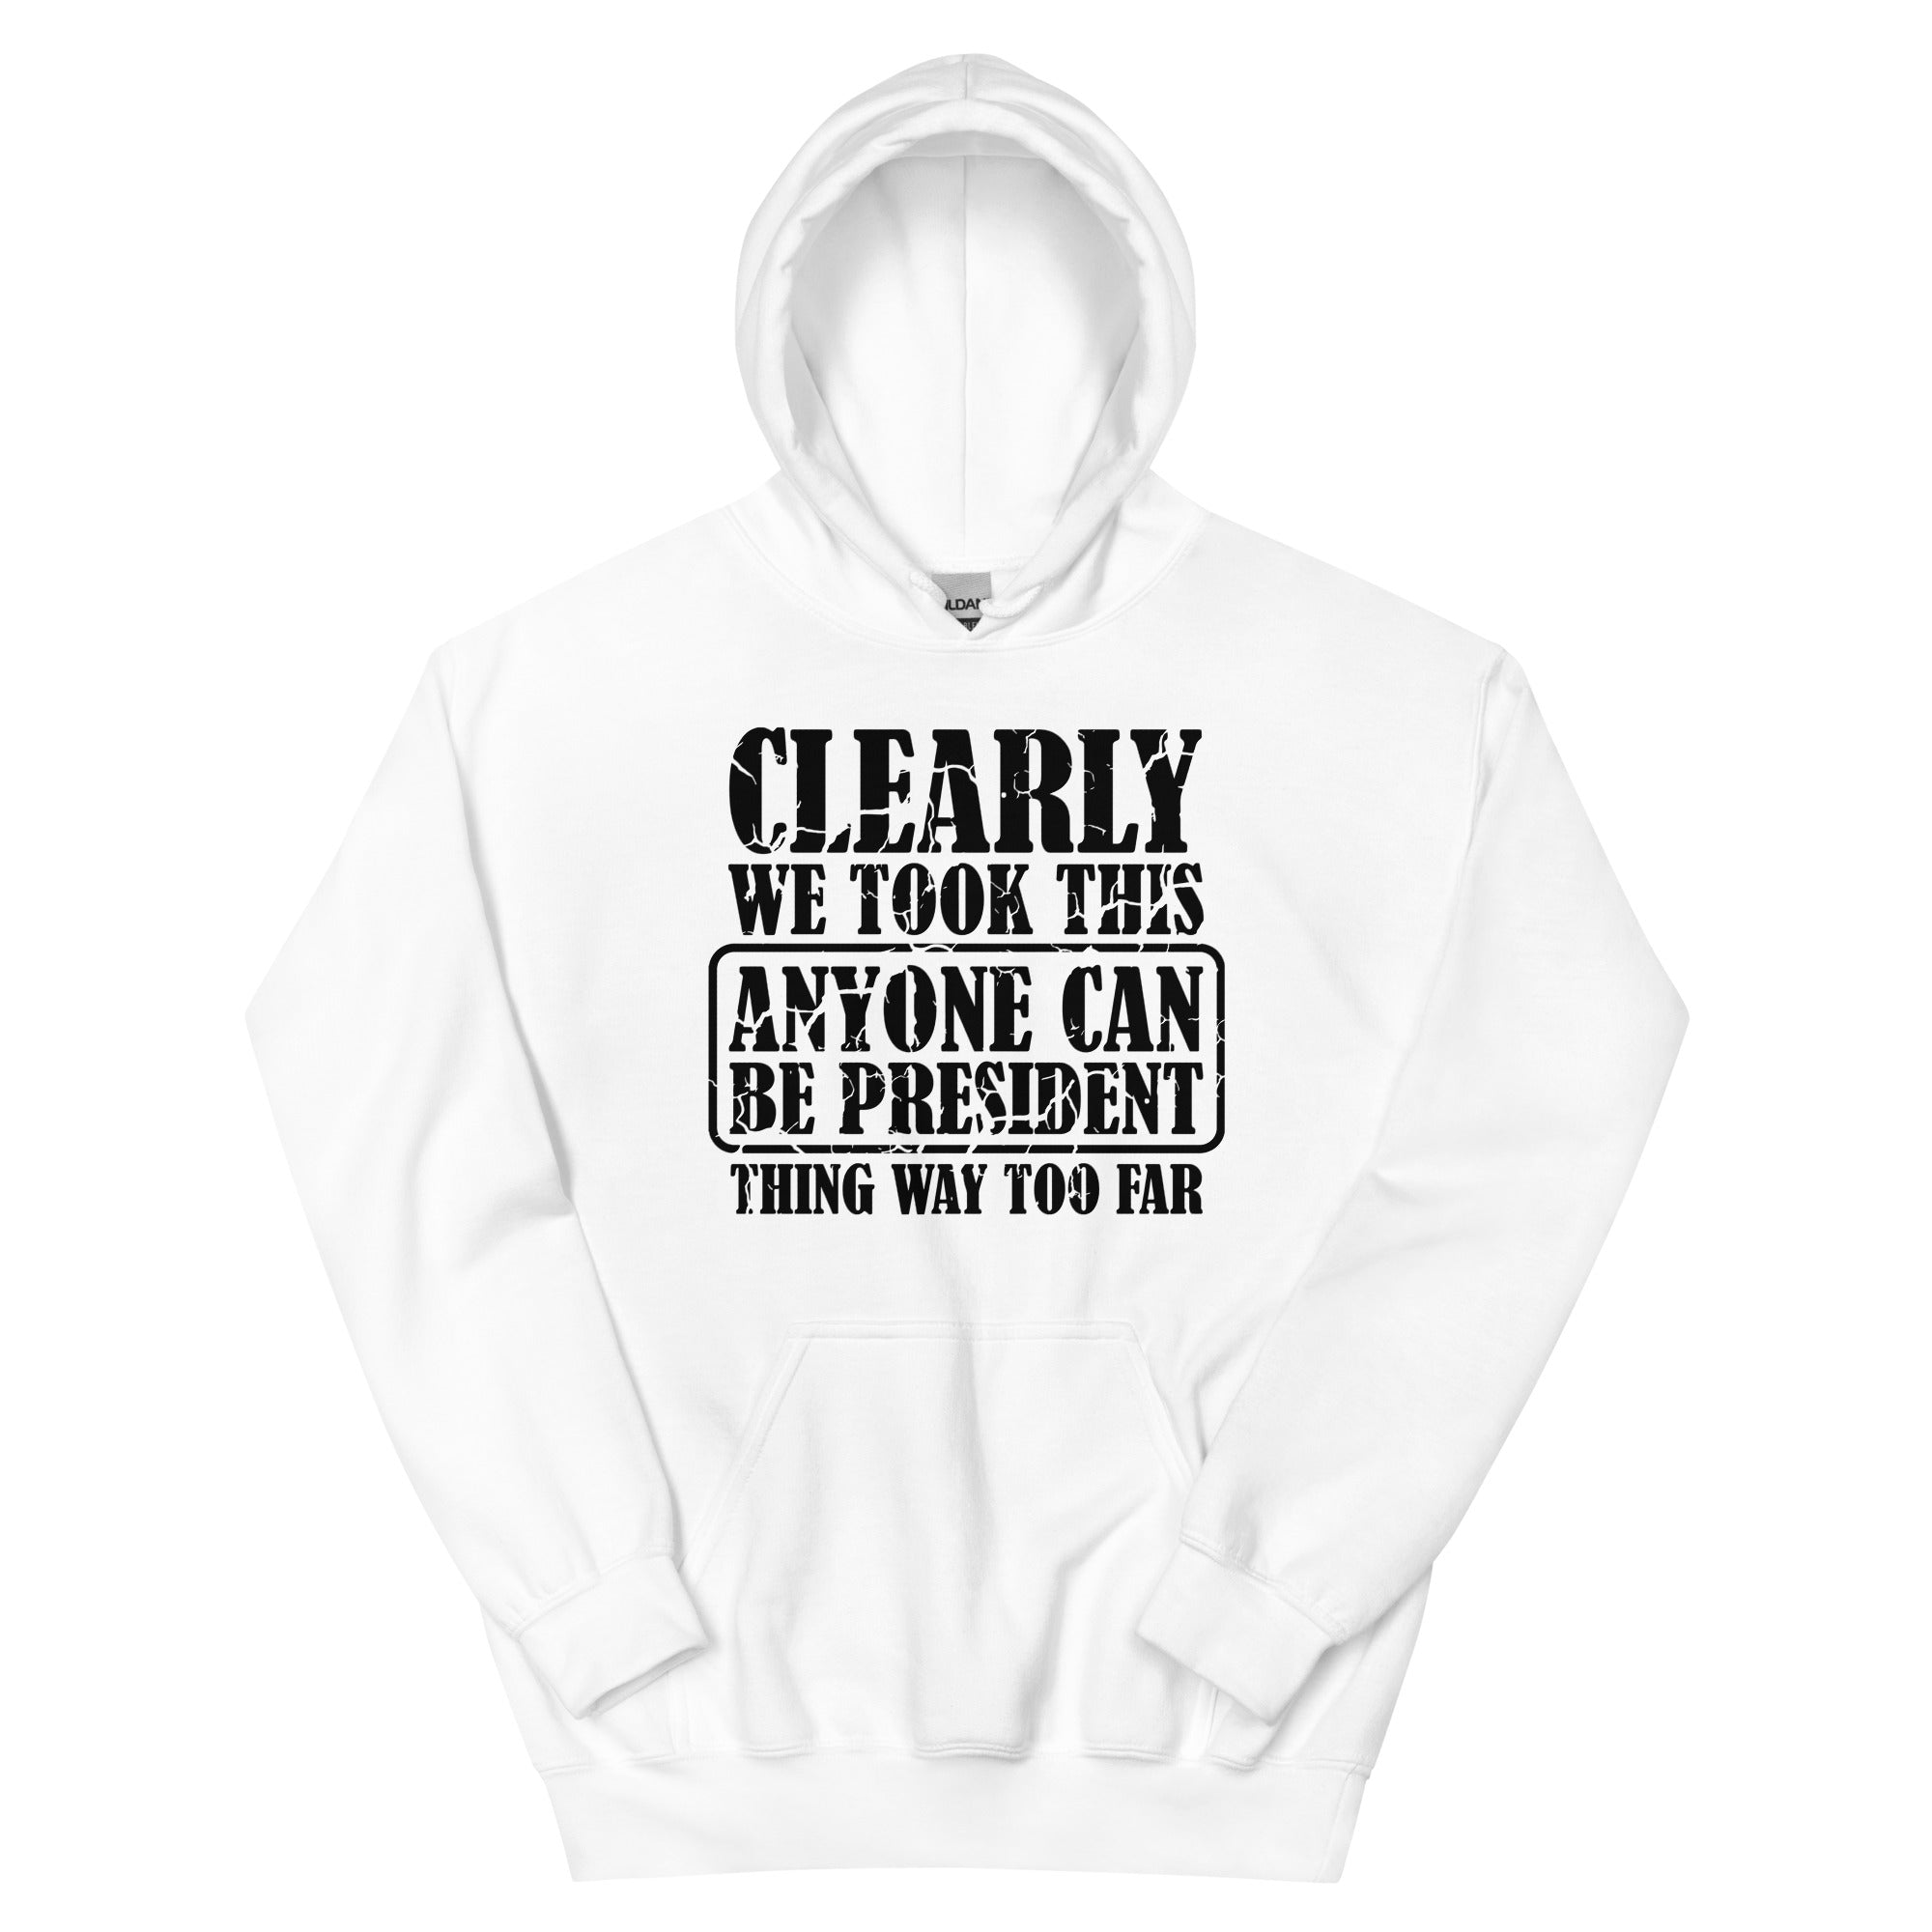 Anyone Can Be President - Unisex Hoodie